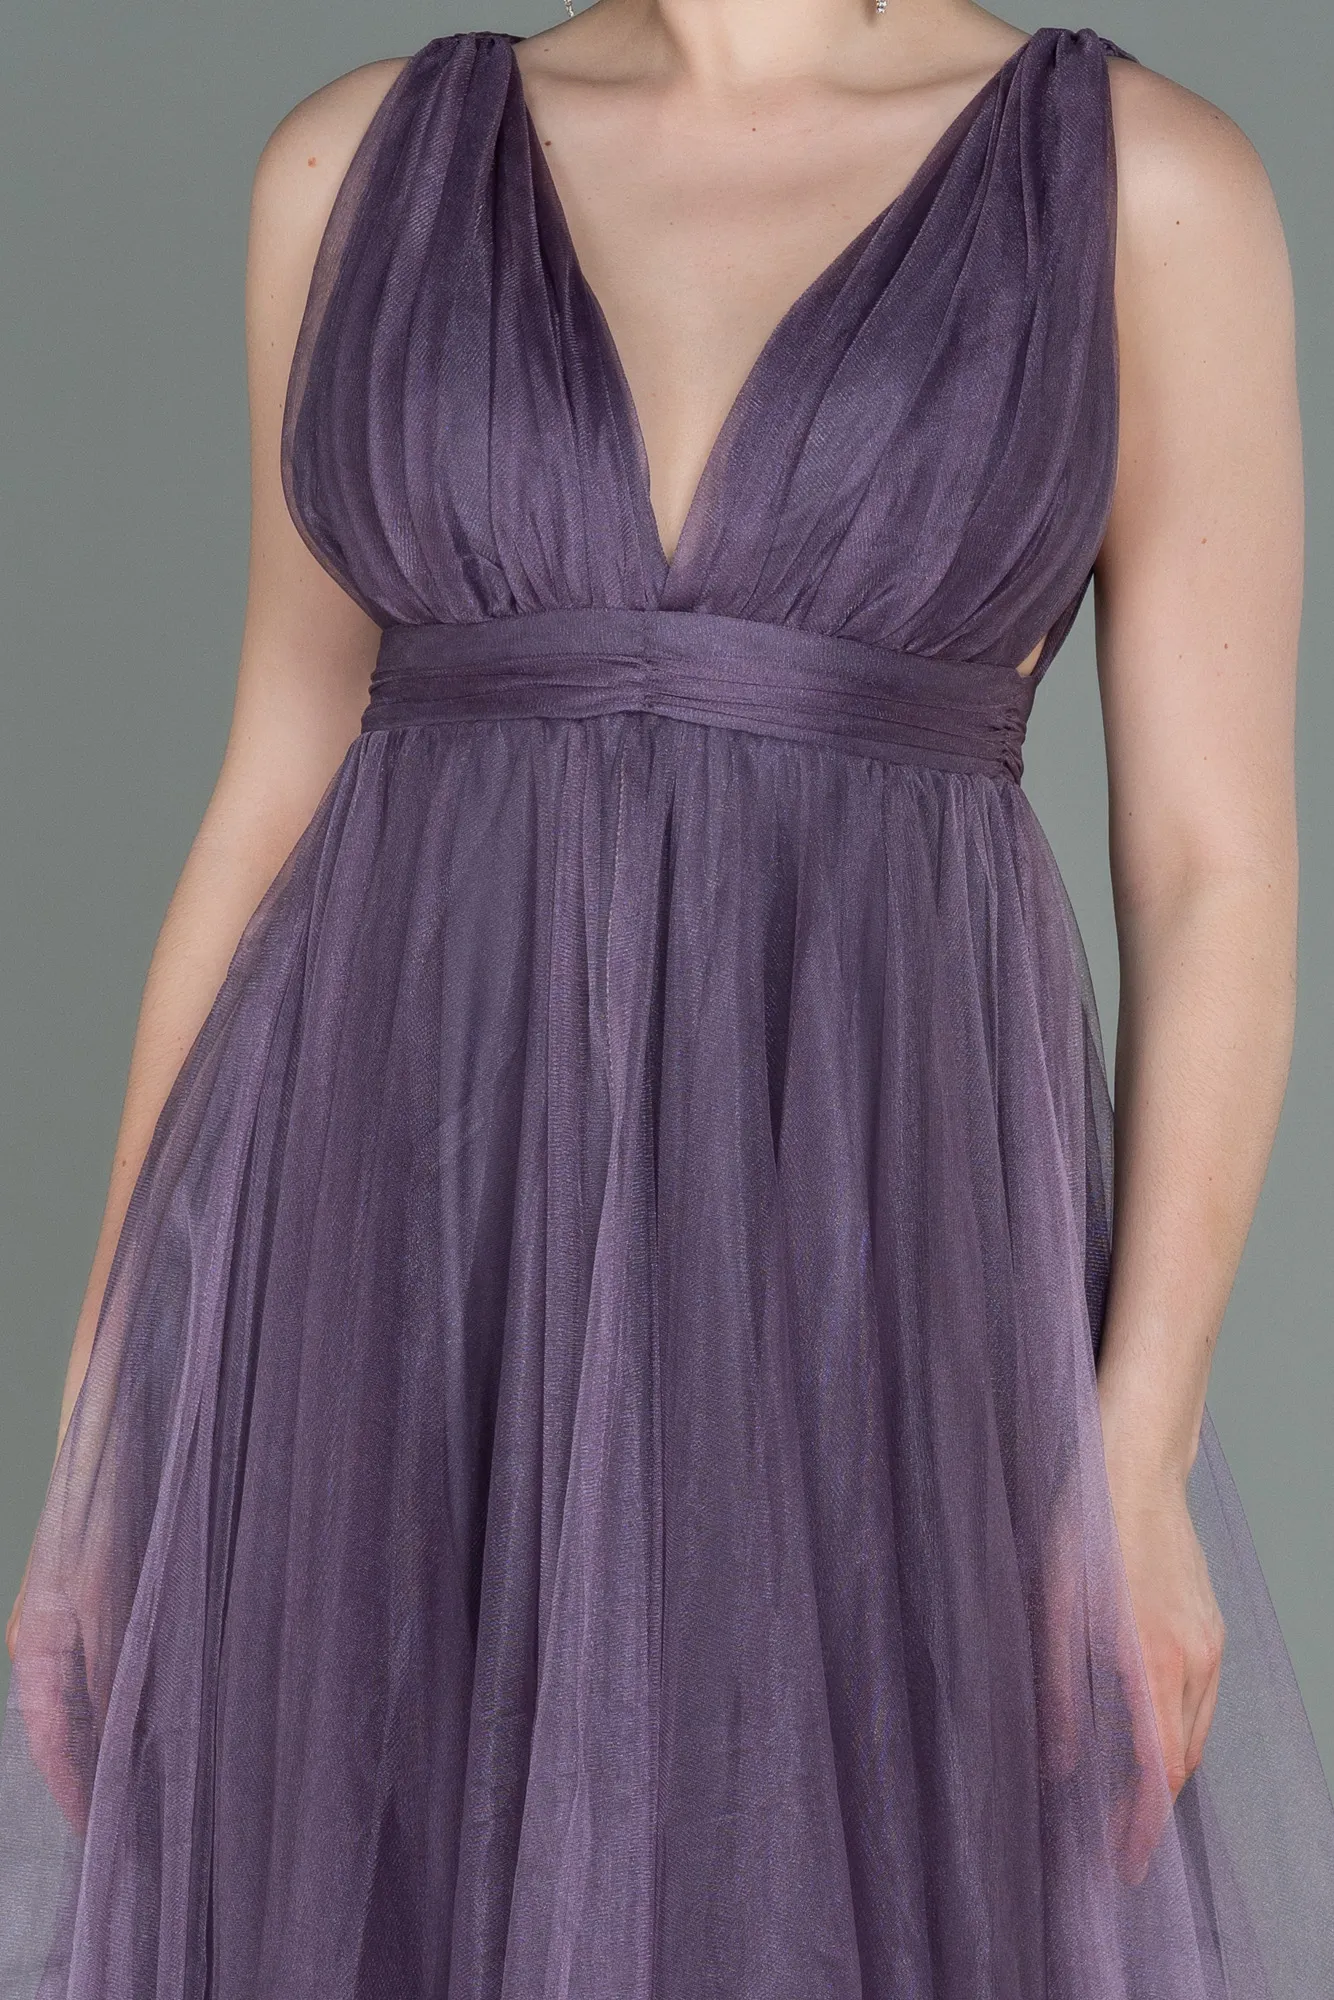 Lavender-Long Prom Gown ABU3135